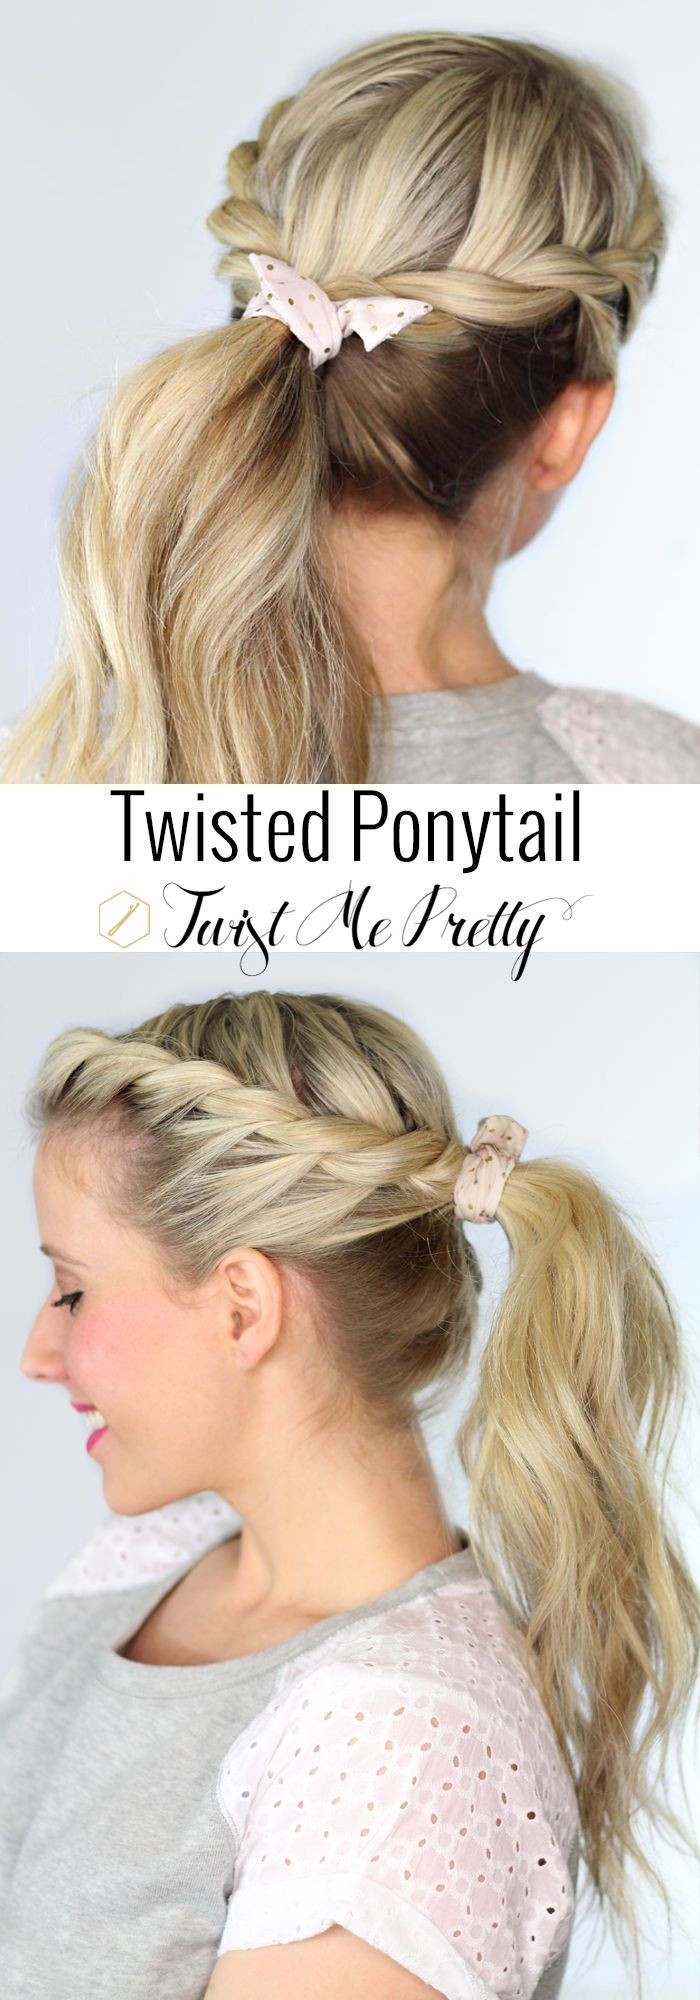 12 Cool Ponytail Hairstyles for Women 2015 Pretty Designs